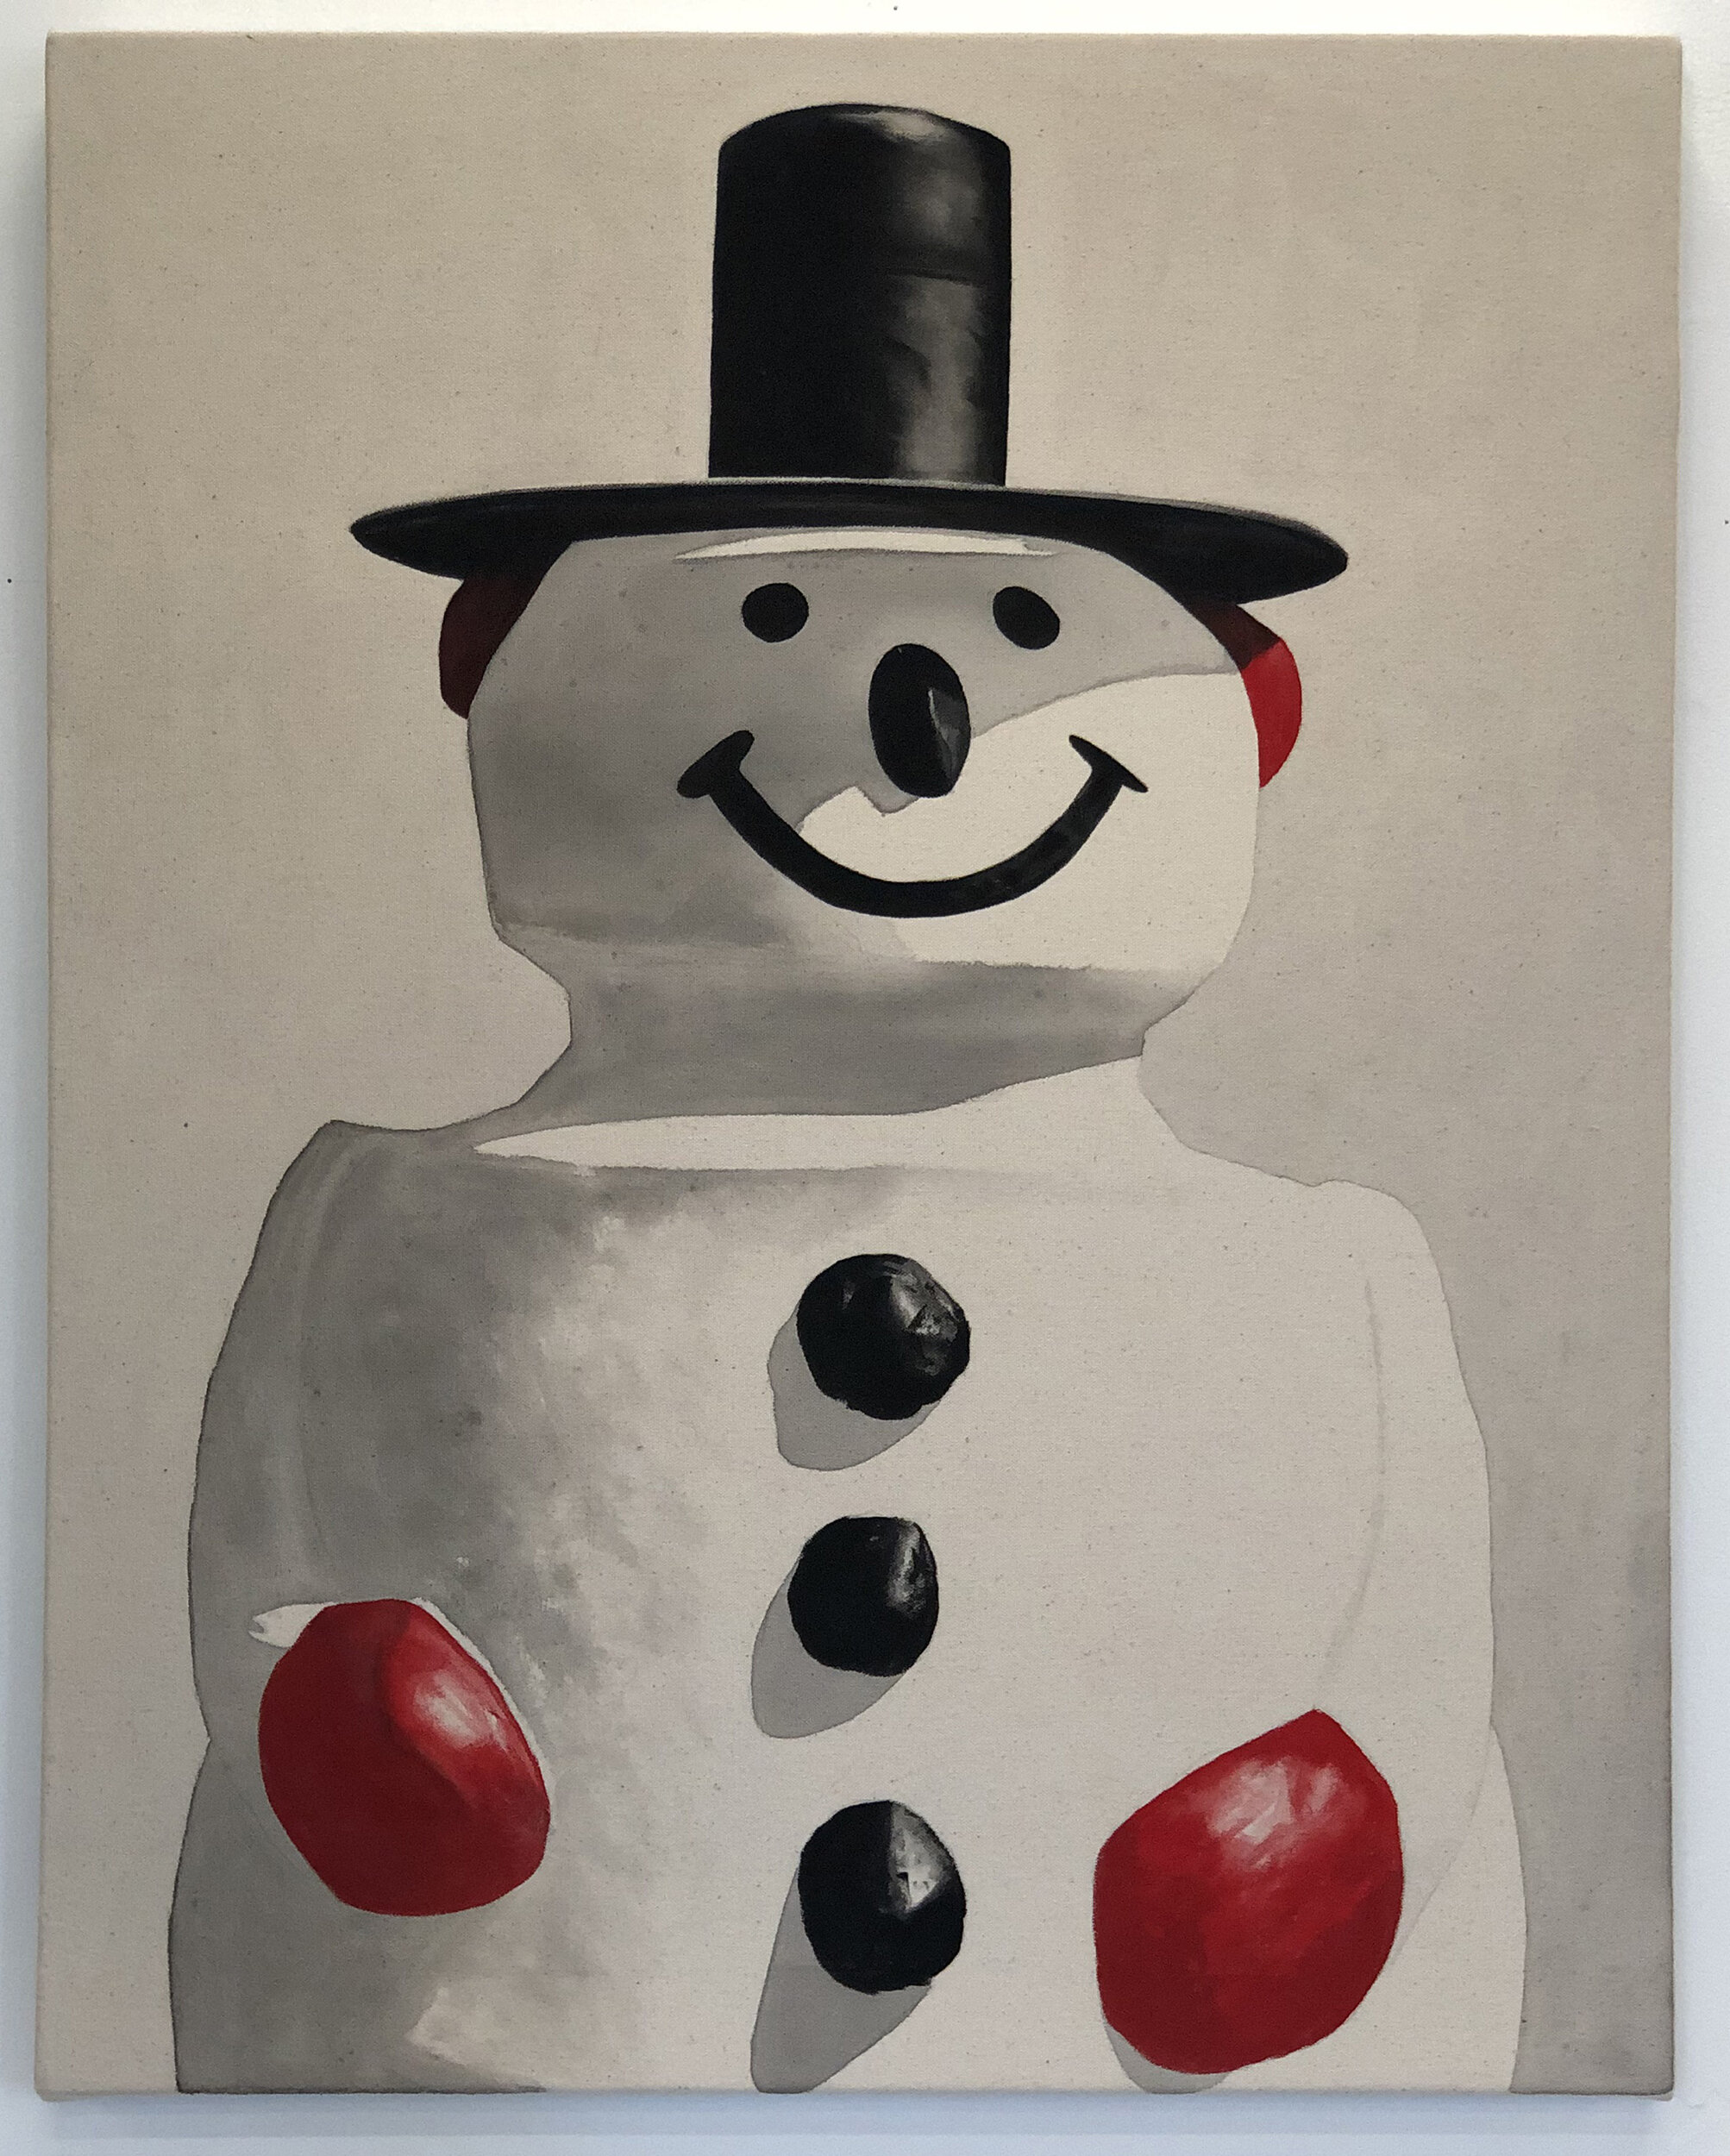   Snowman (II) , 2020 Black gesso and acrylic on canvas 24 x 30 inches (61cm x 76cm) 